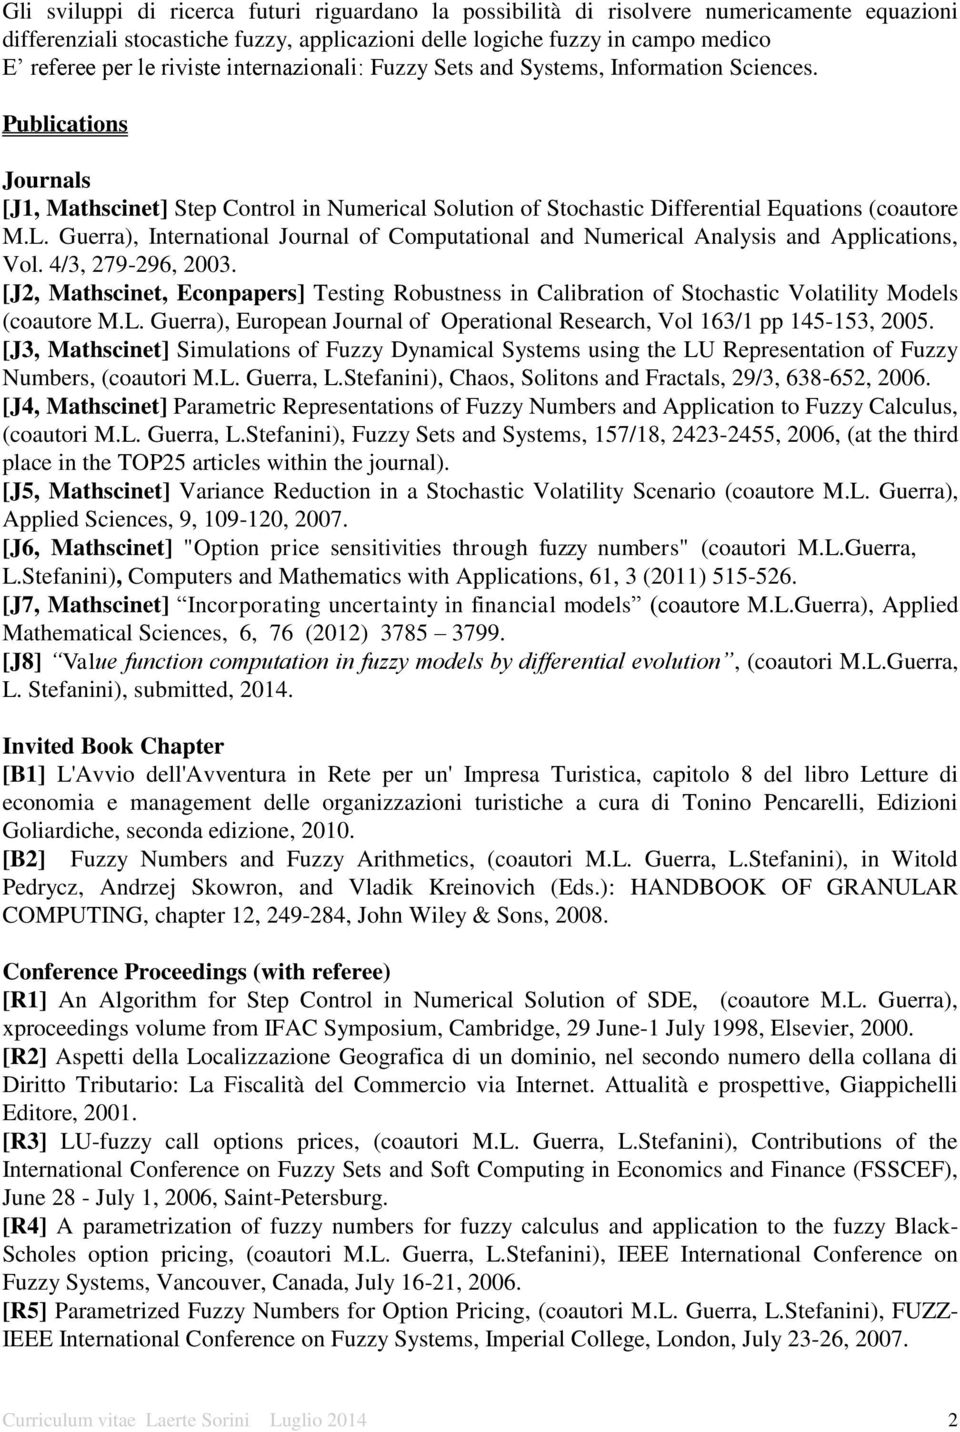 Guerra), International Journal of Computational and Numerical Analysis and Applications, Vol. 4/3, 279-296, 2003.